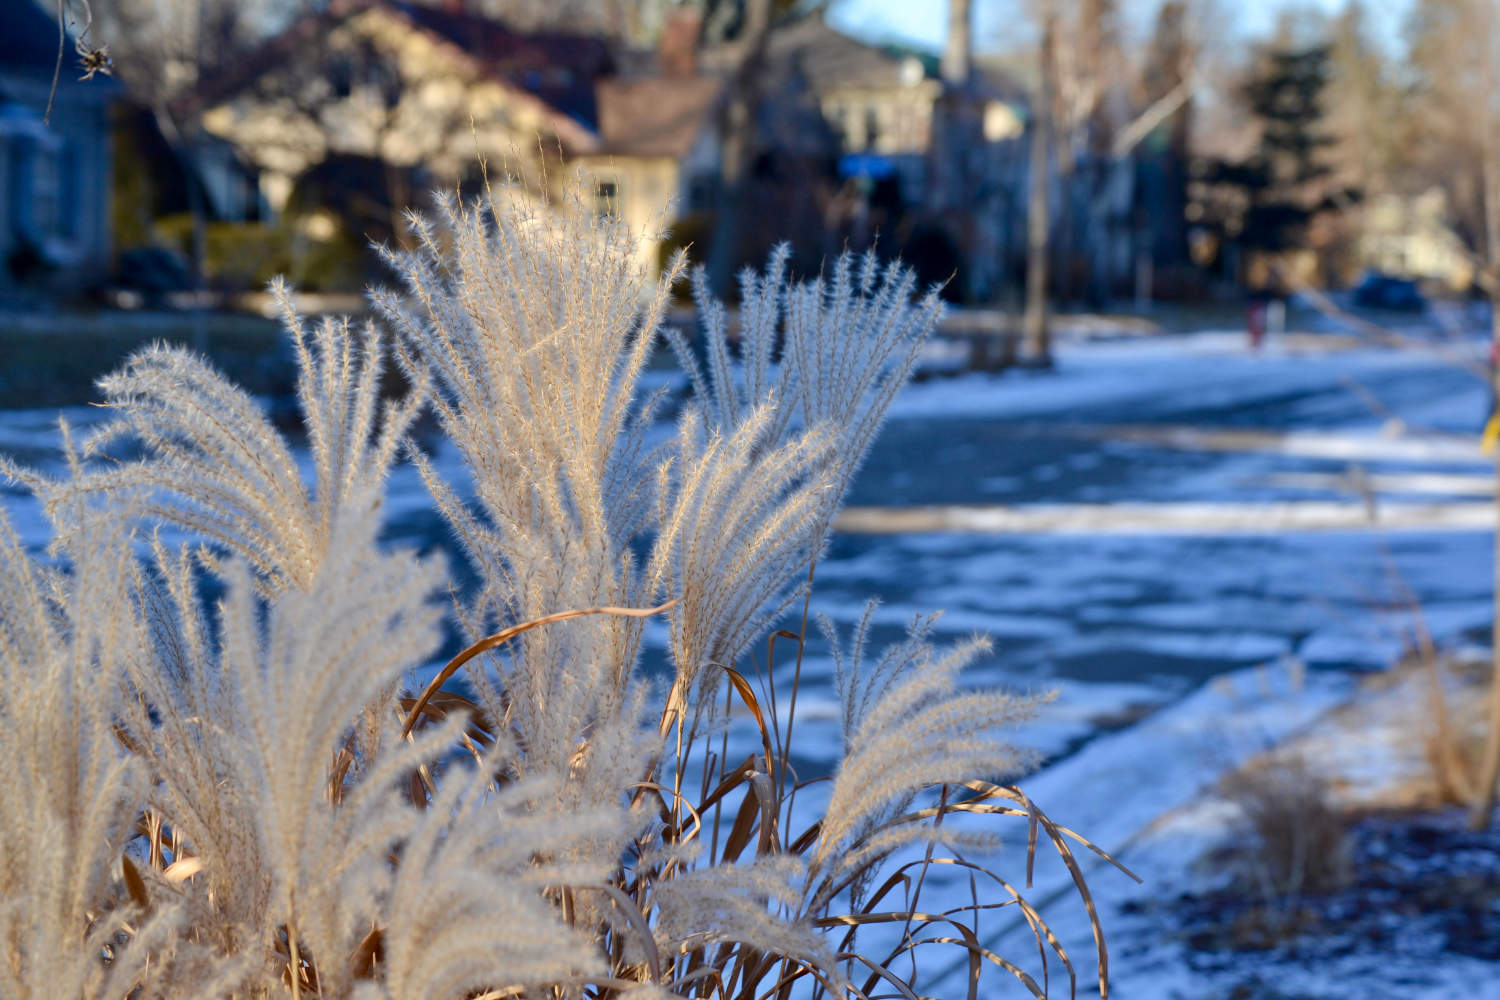 Fuzzy haired golden grasses with bluish snowy background